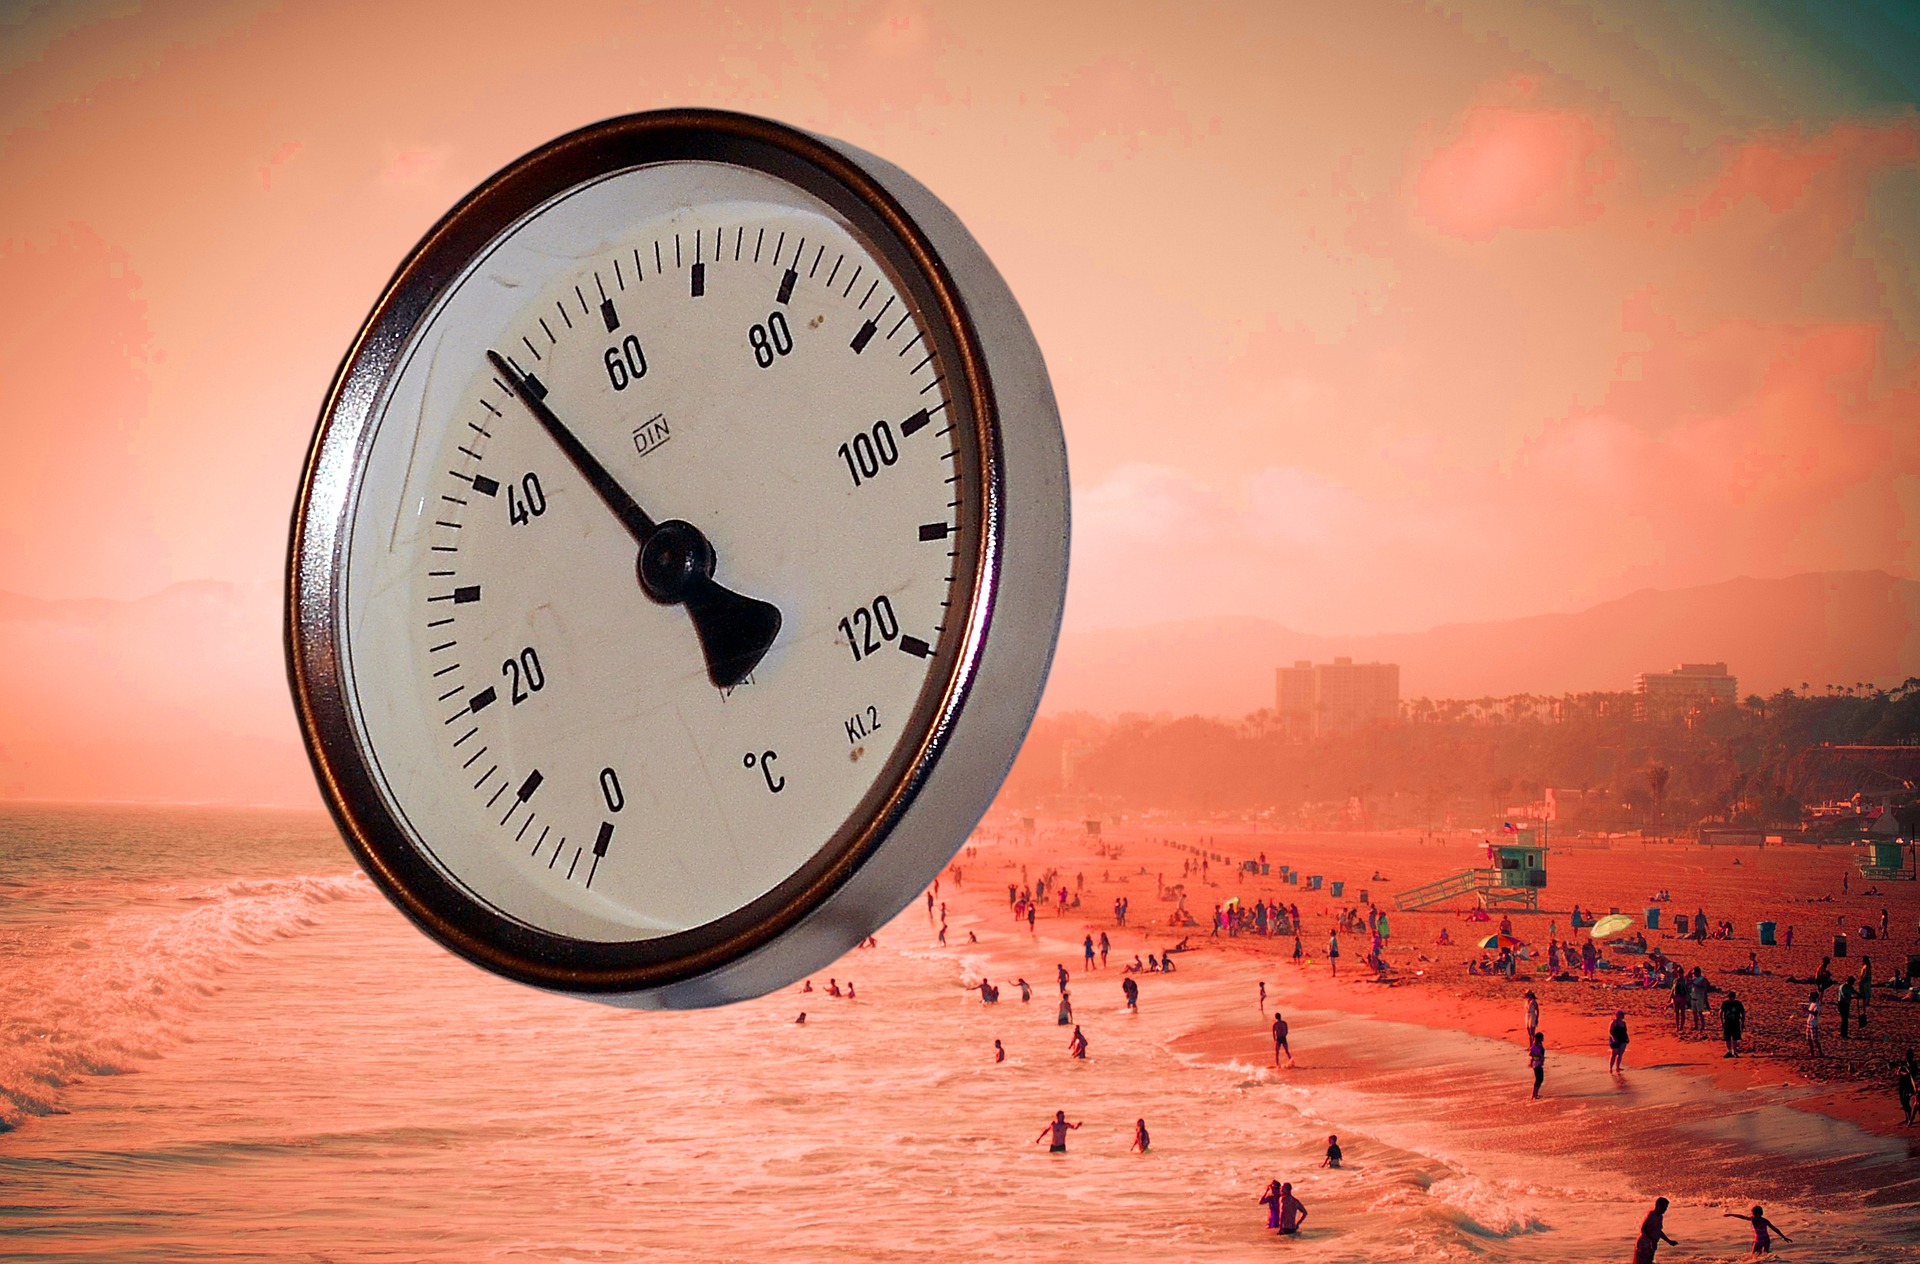 Hot temperature at beach with a temperature measurement watch 